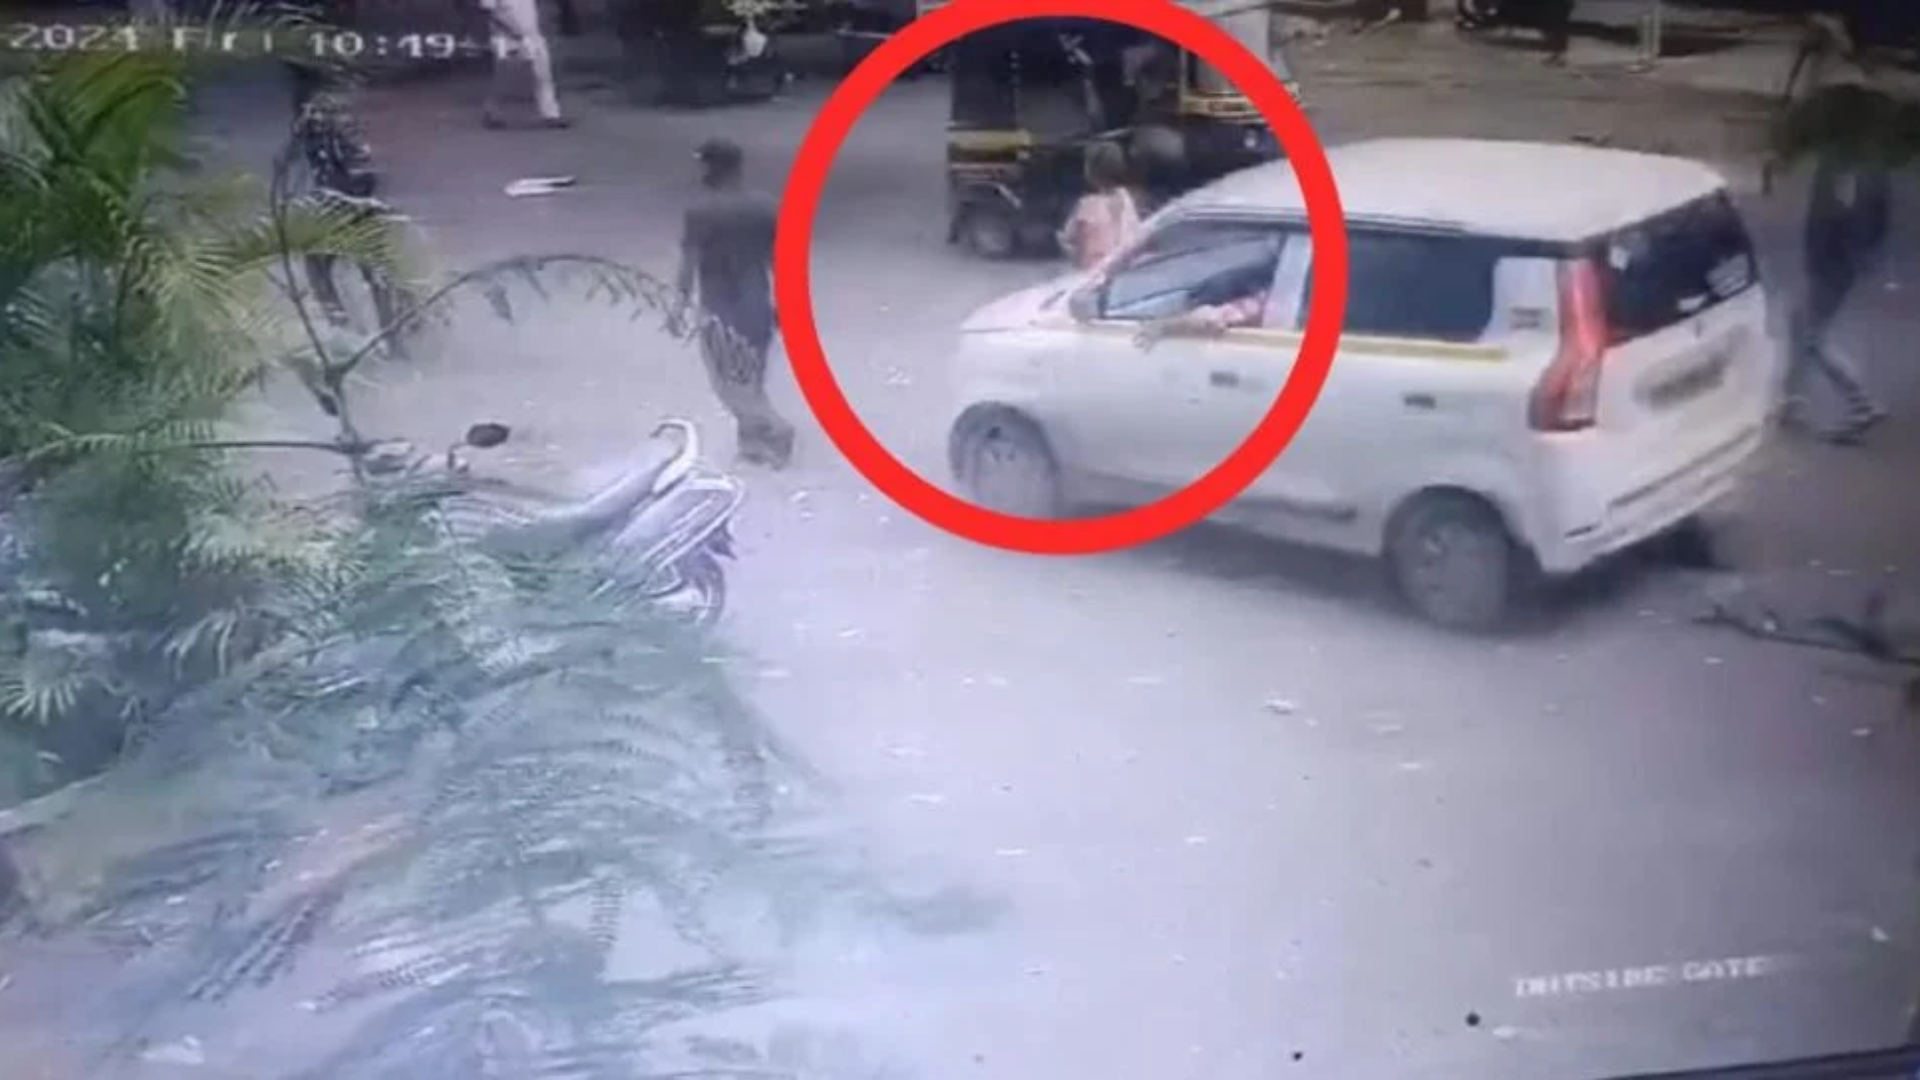 Man Runs Over Three, Kills Elderly Woman, Injures Two Others While Learning To Drive